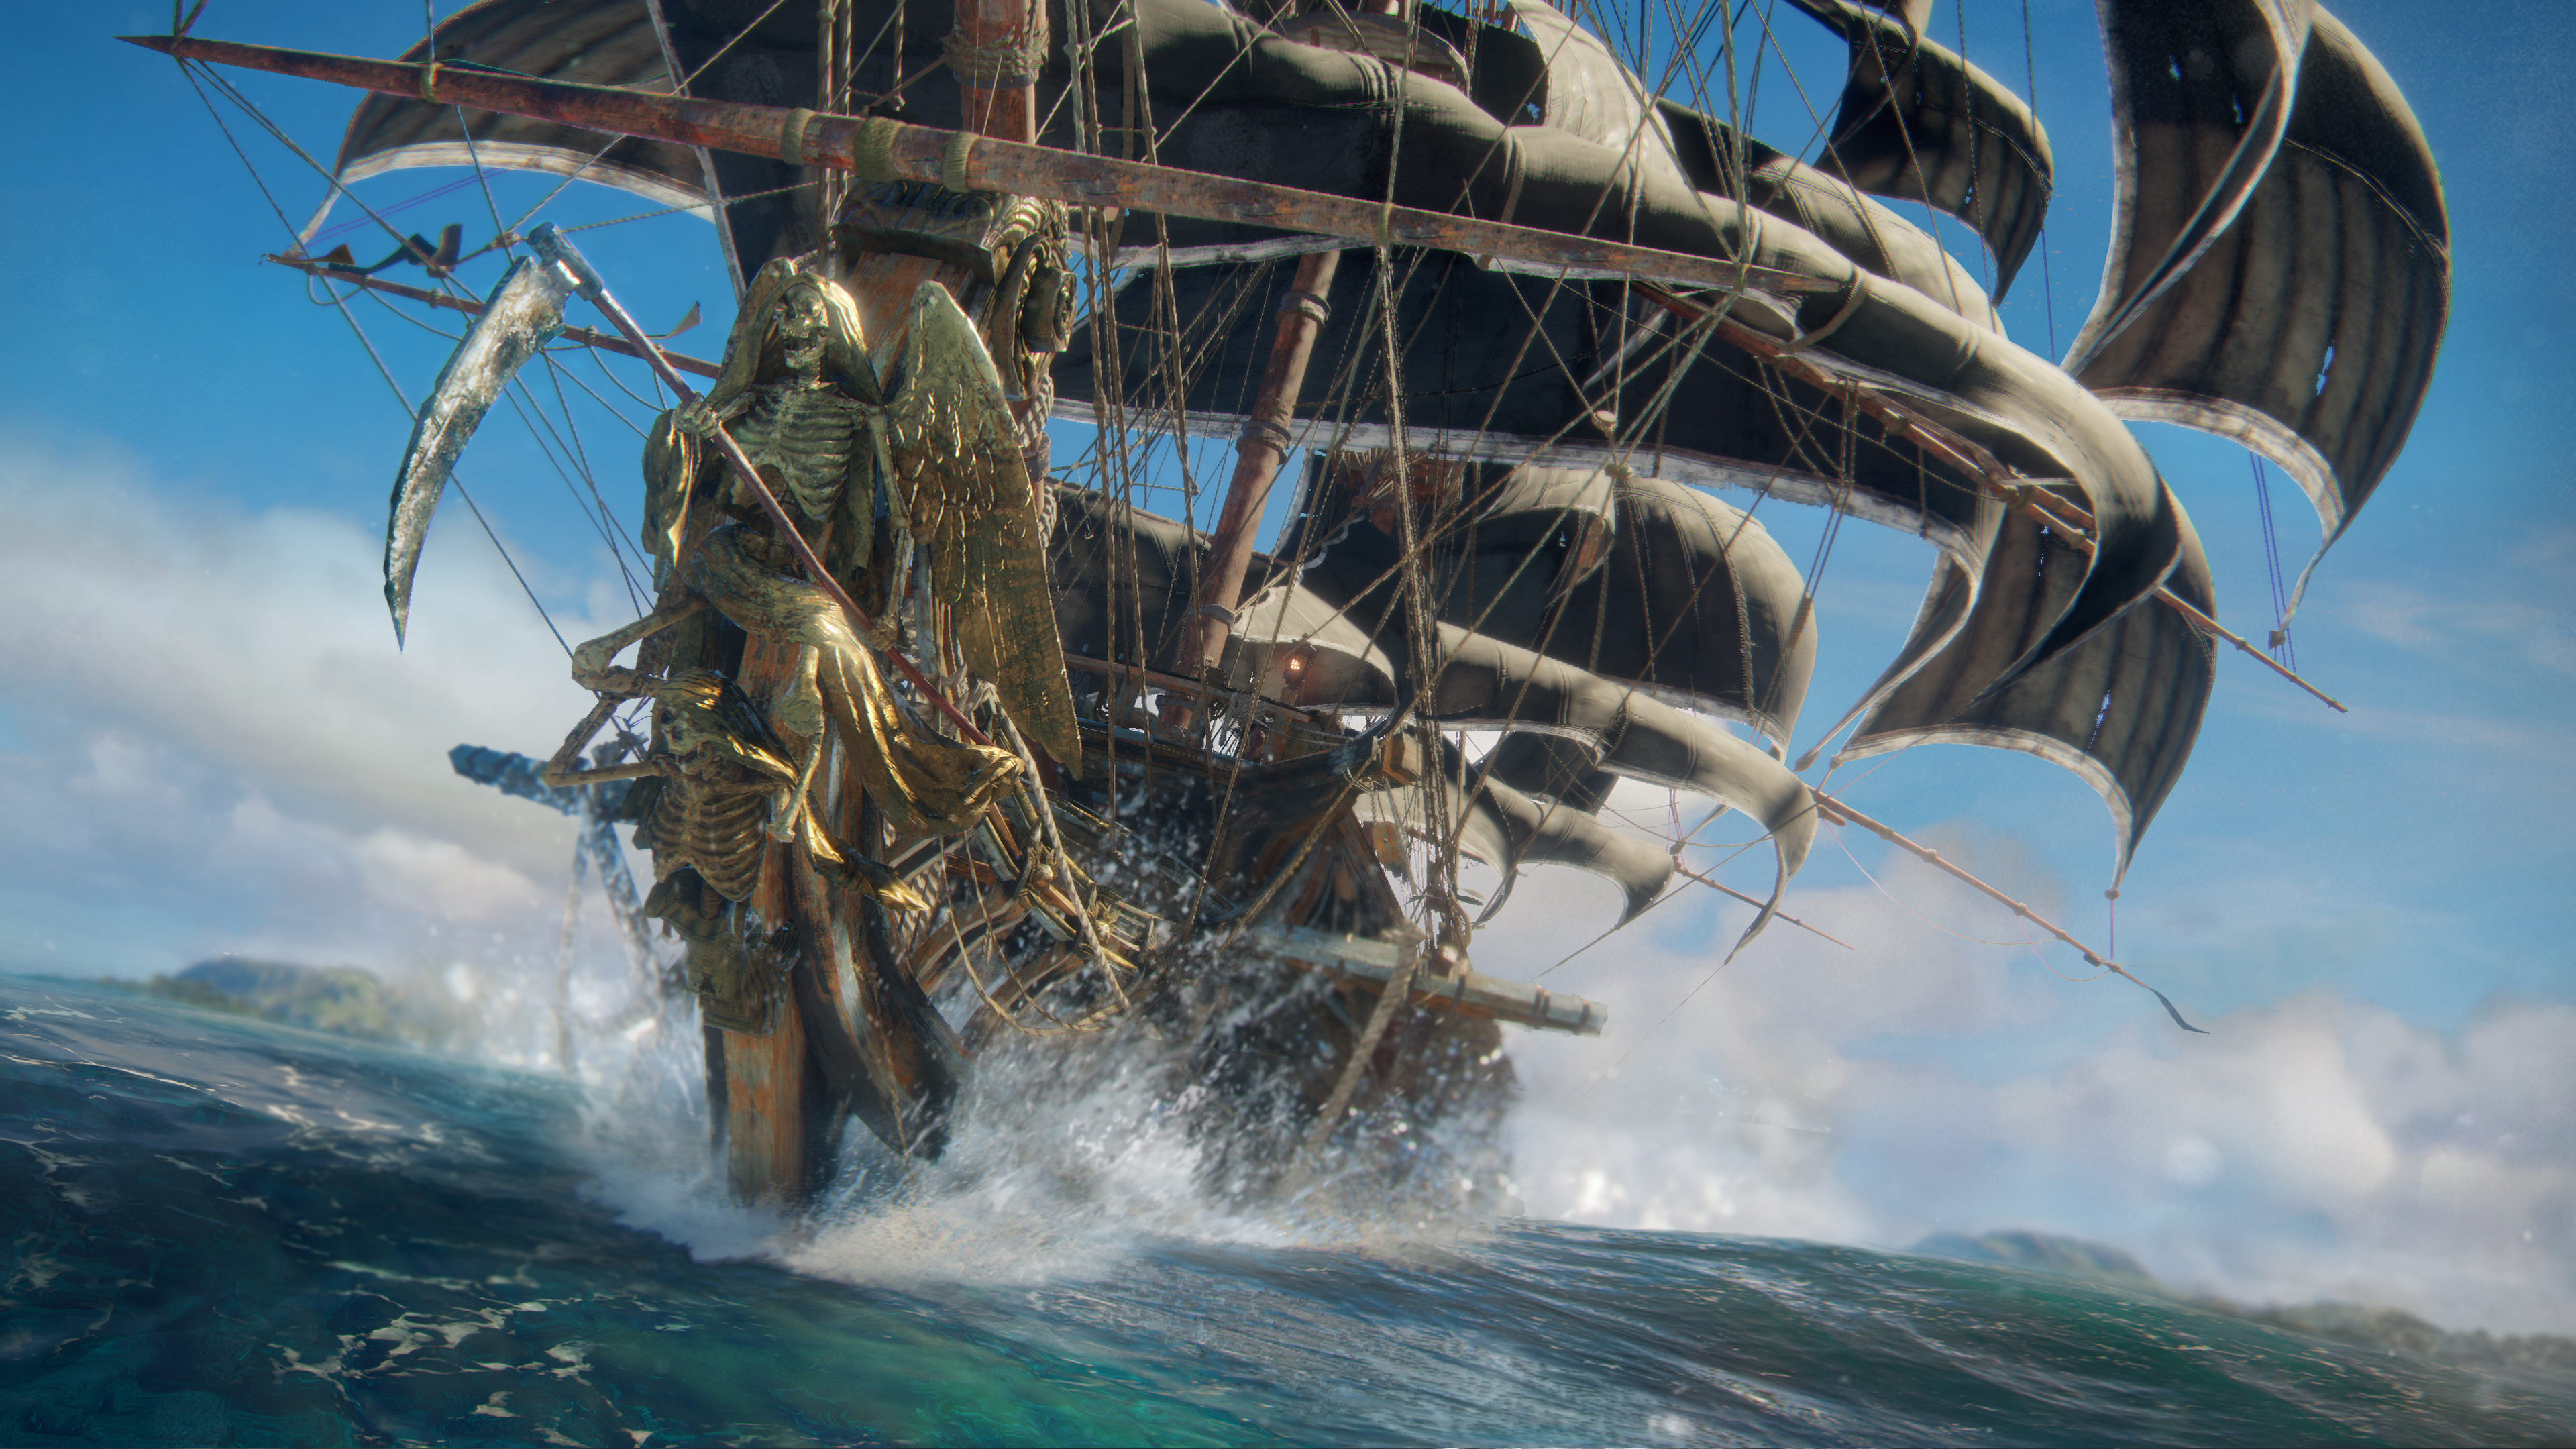 Skull & Bones Doesn't Have A Place In The Gaming Landscape Anymore